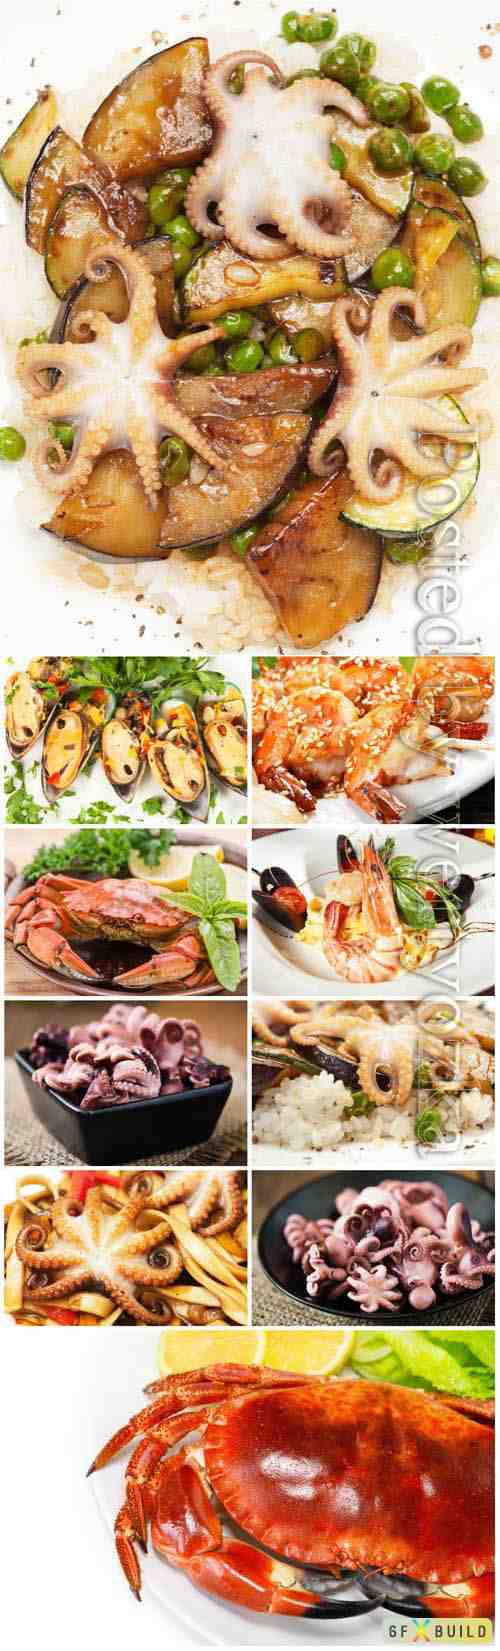 Seafood, delicious food stock photo